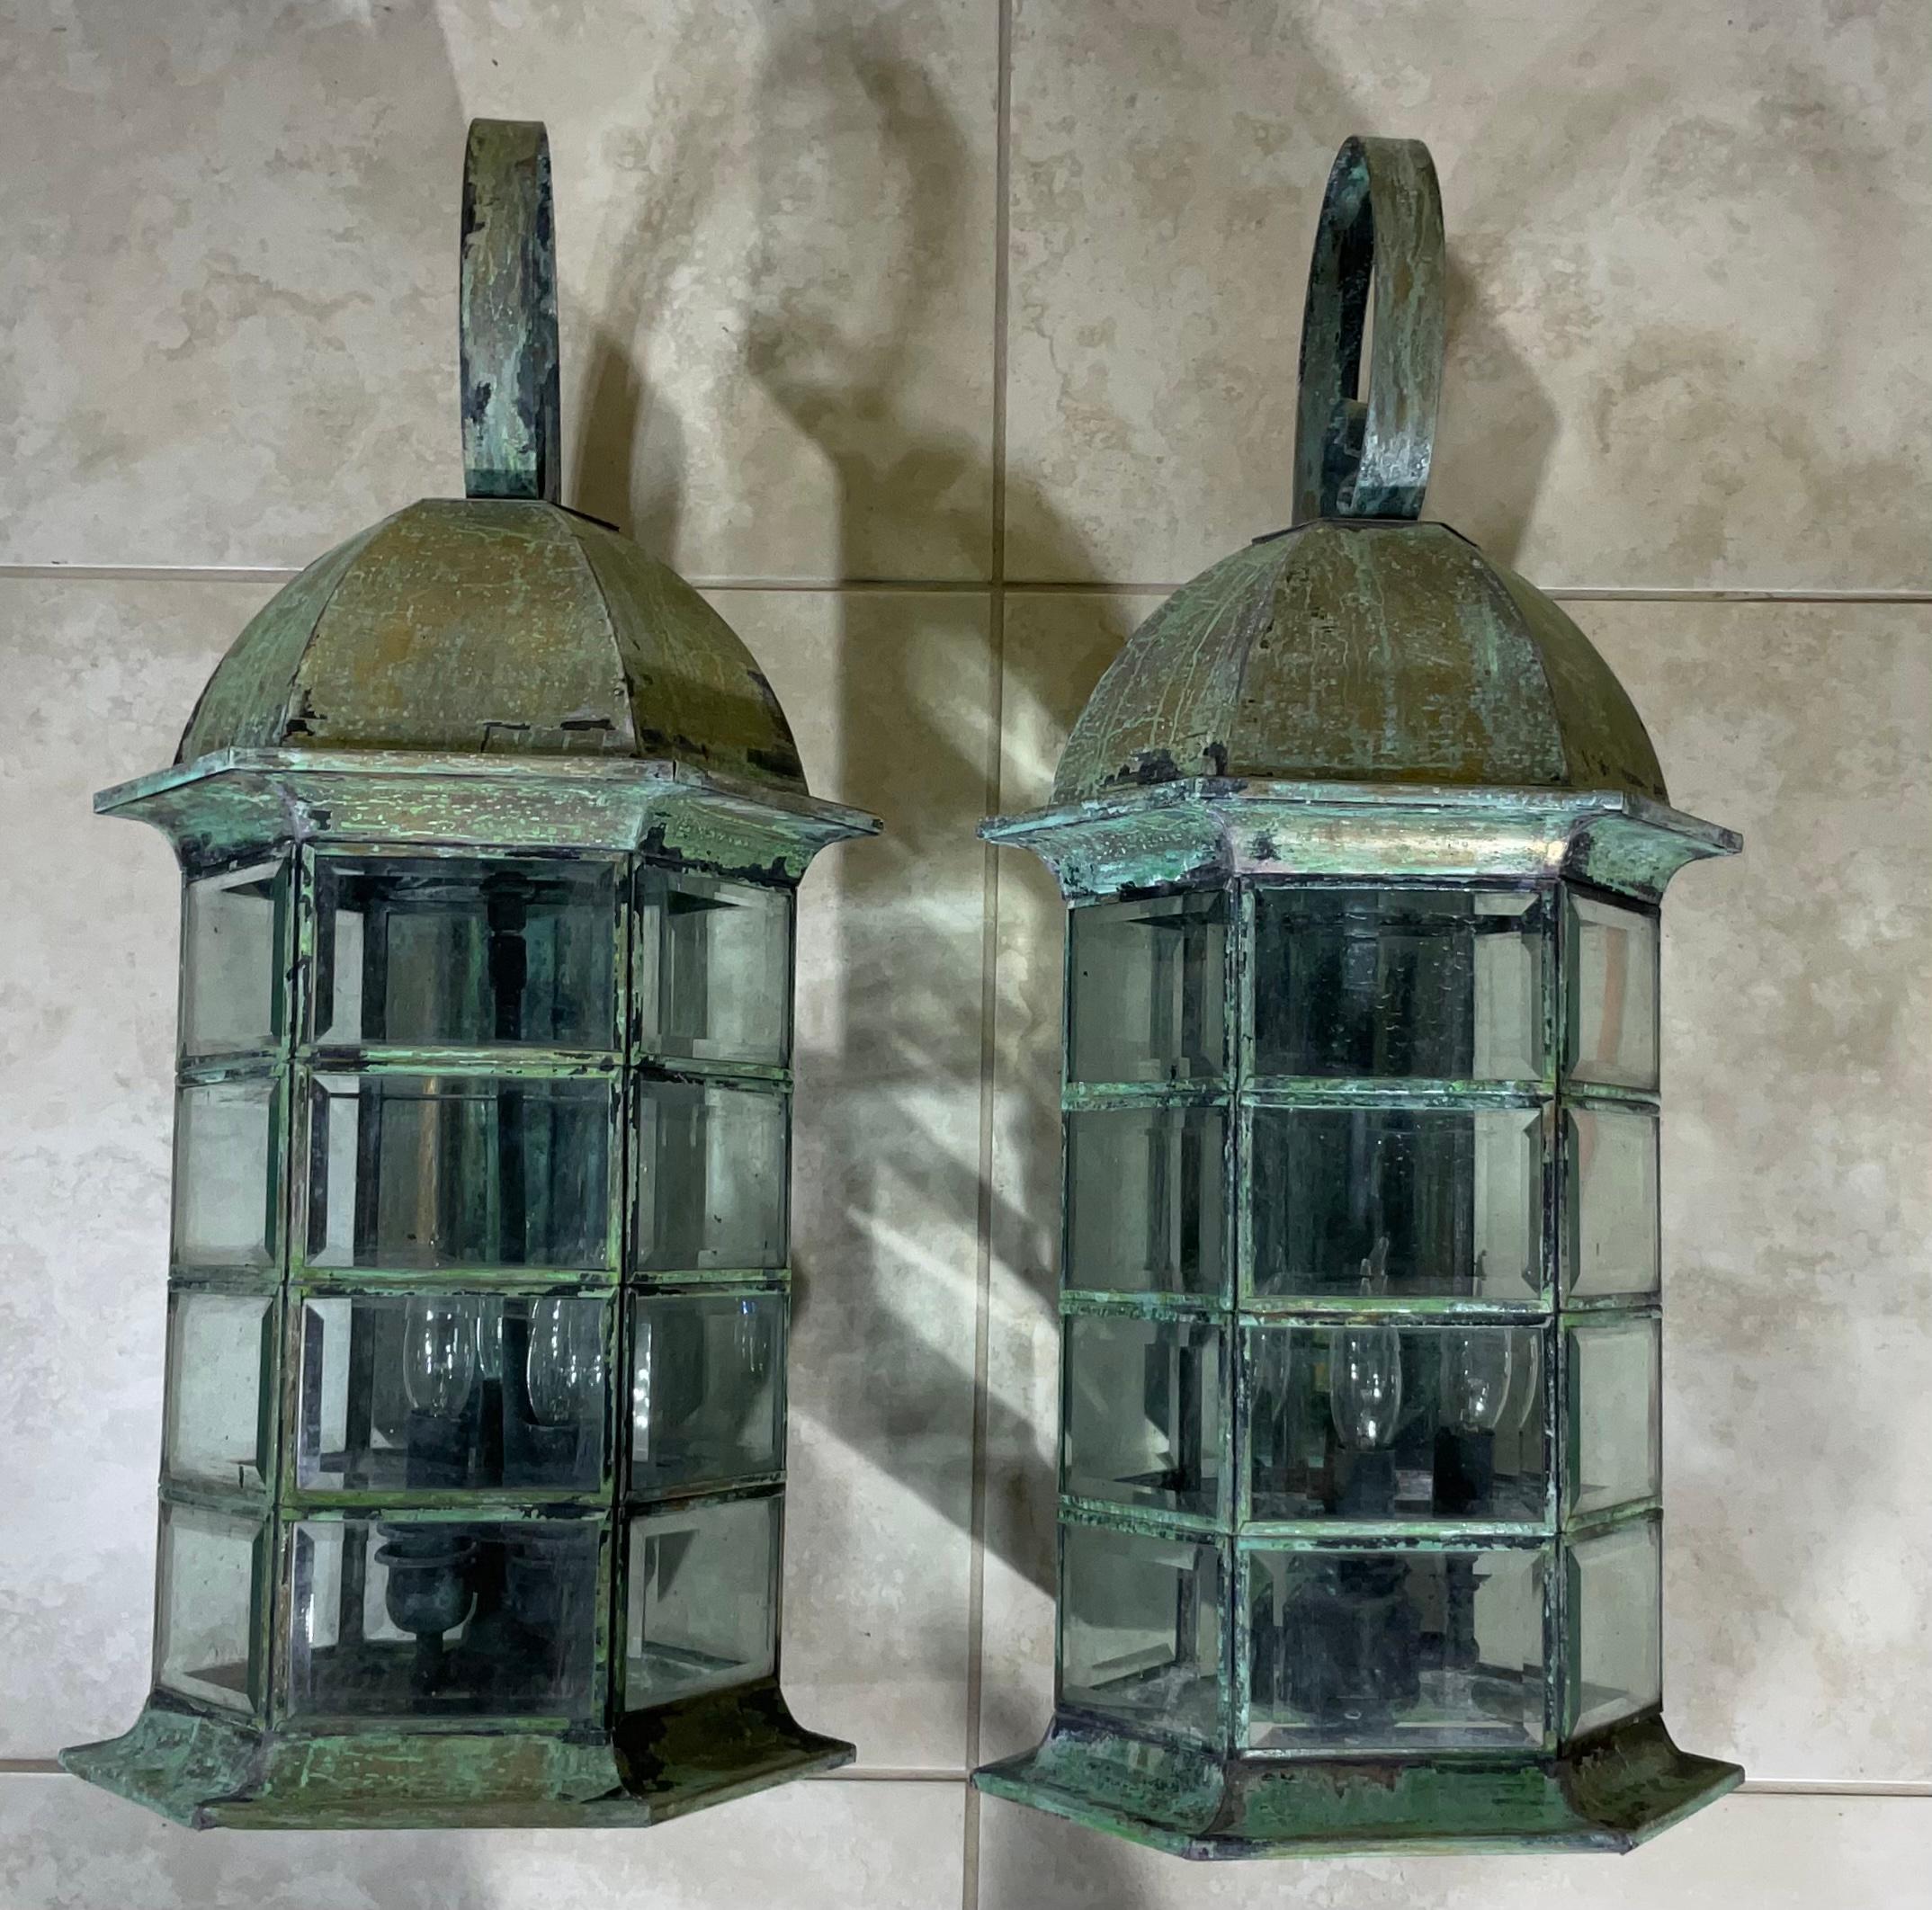 Pair of wall lantern or wall sconces, made of solid brass , beautiful patina, beveled glass , four 60/watt lights each lantern,
Suitable for wet locations, 
Great looking wall lanterns for any entrance.